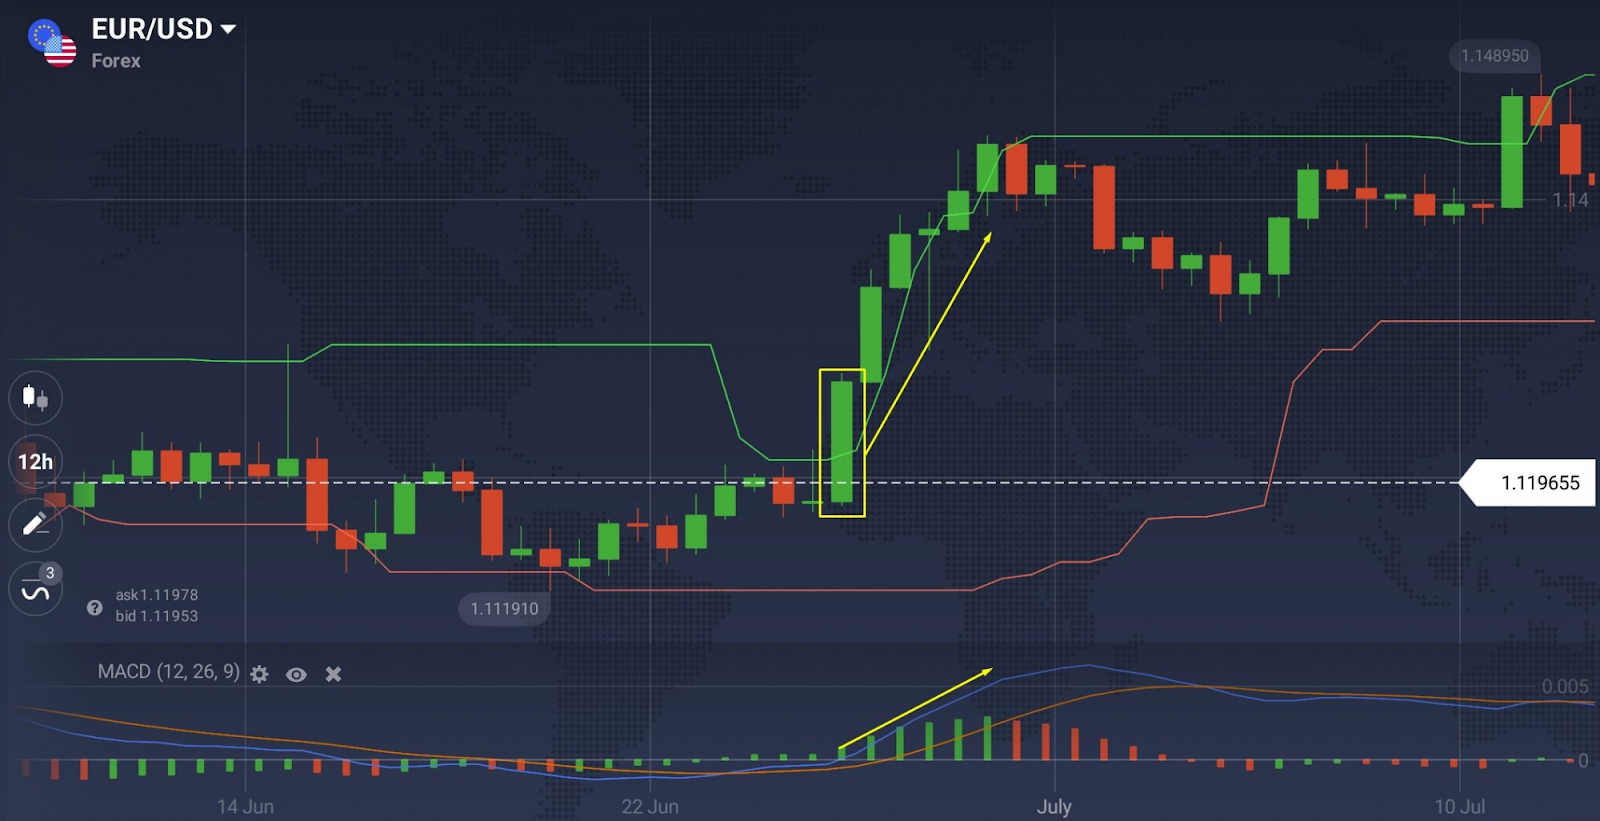 A breakout and a strong positive trend verified